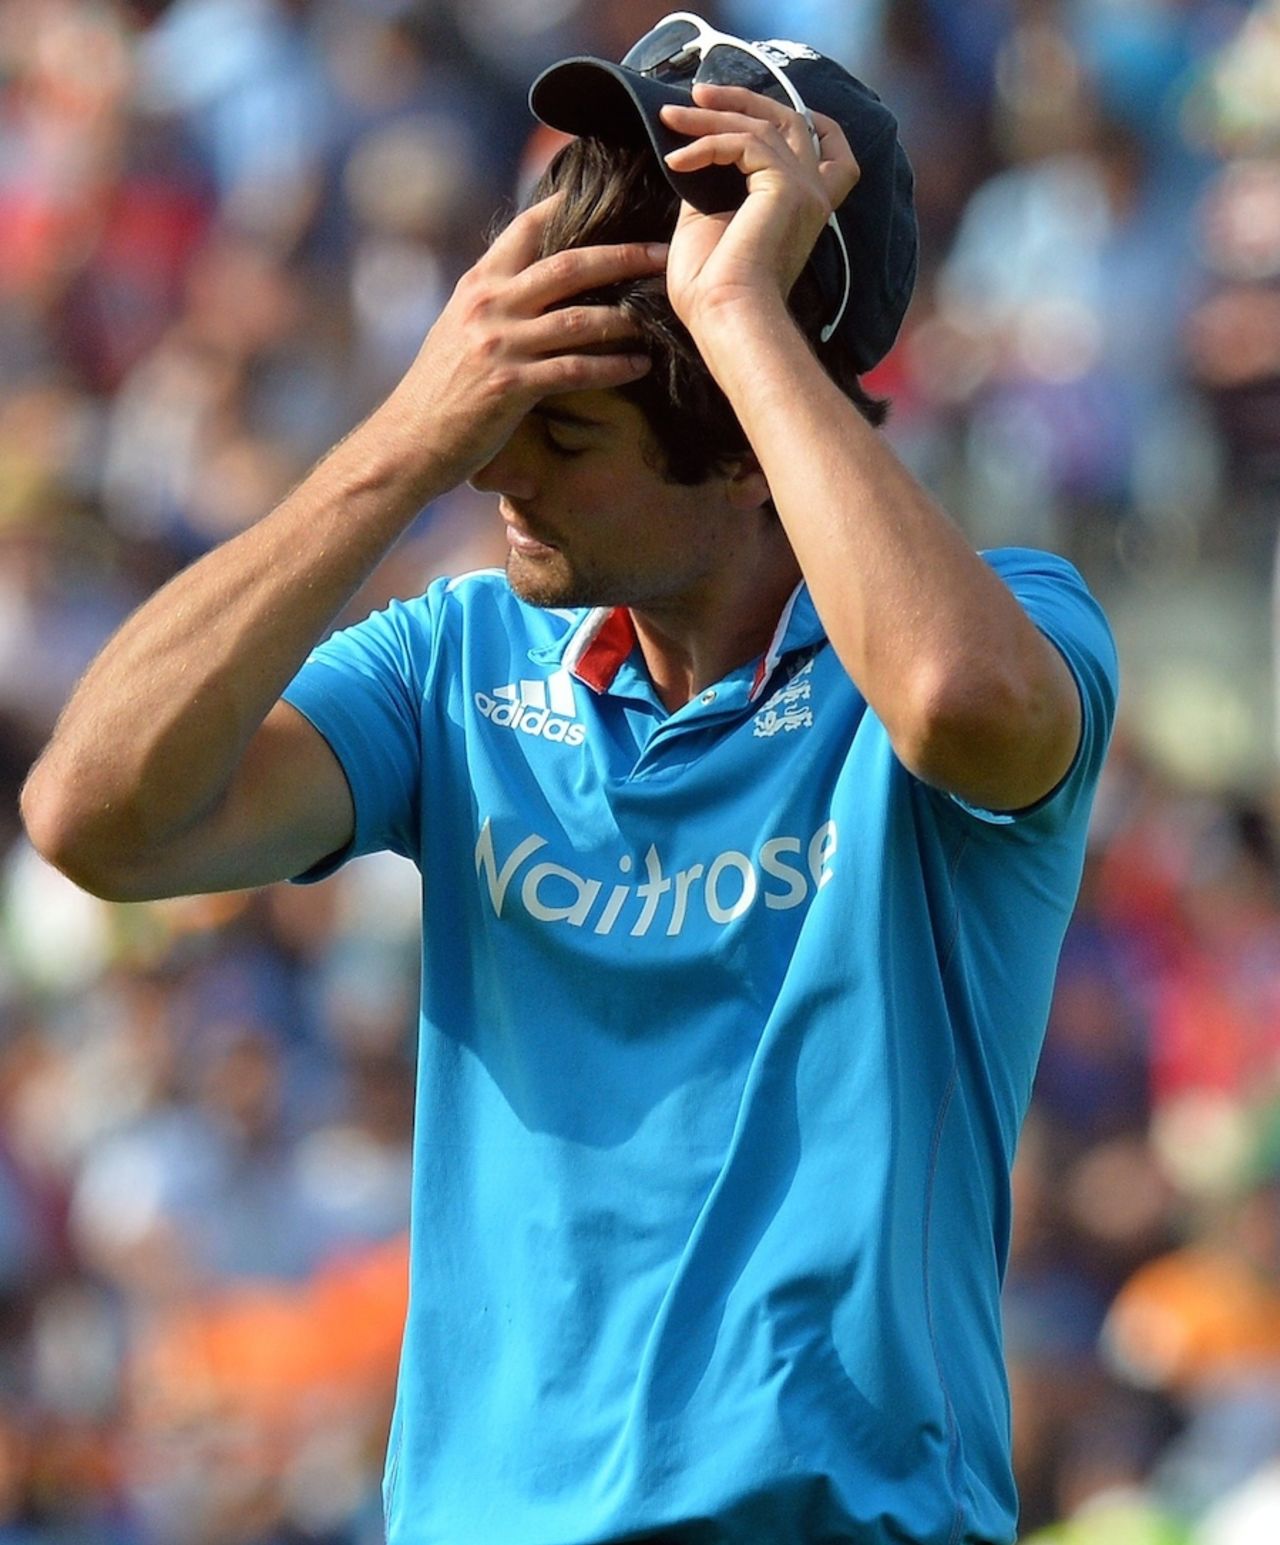 A disappointed Alastair Cook walks back after the loss, England v India, 4th ODI, Edgbaston, September 2, 2014